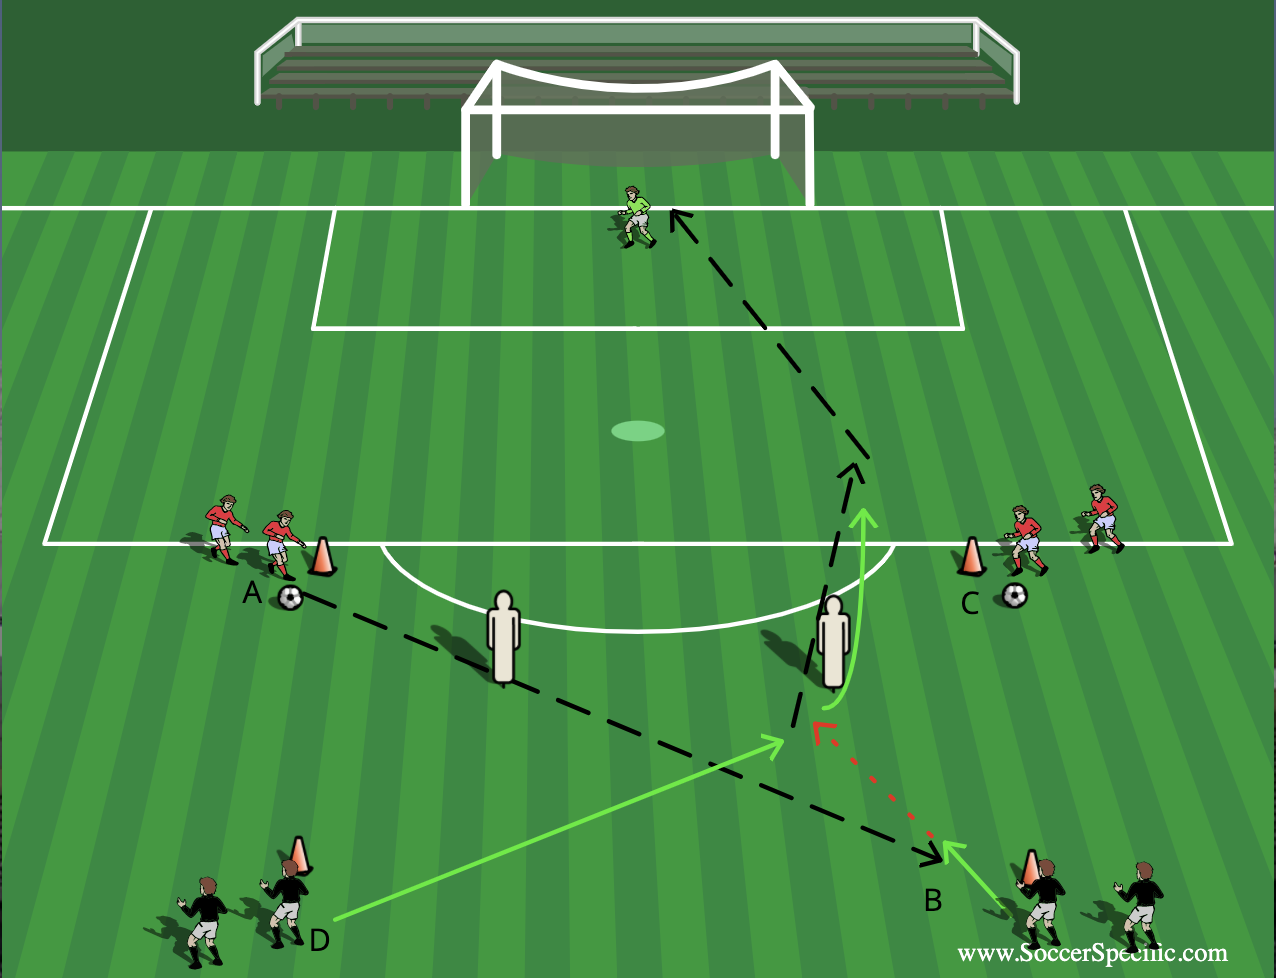 The Art of Penetration 1 | SoccerSpecific.com